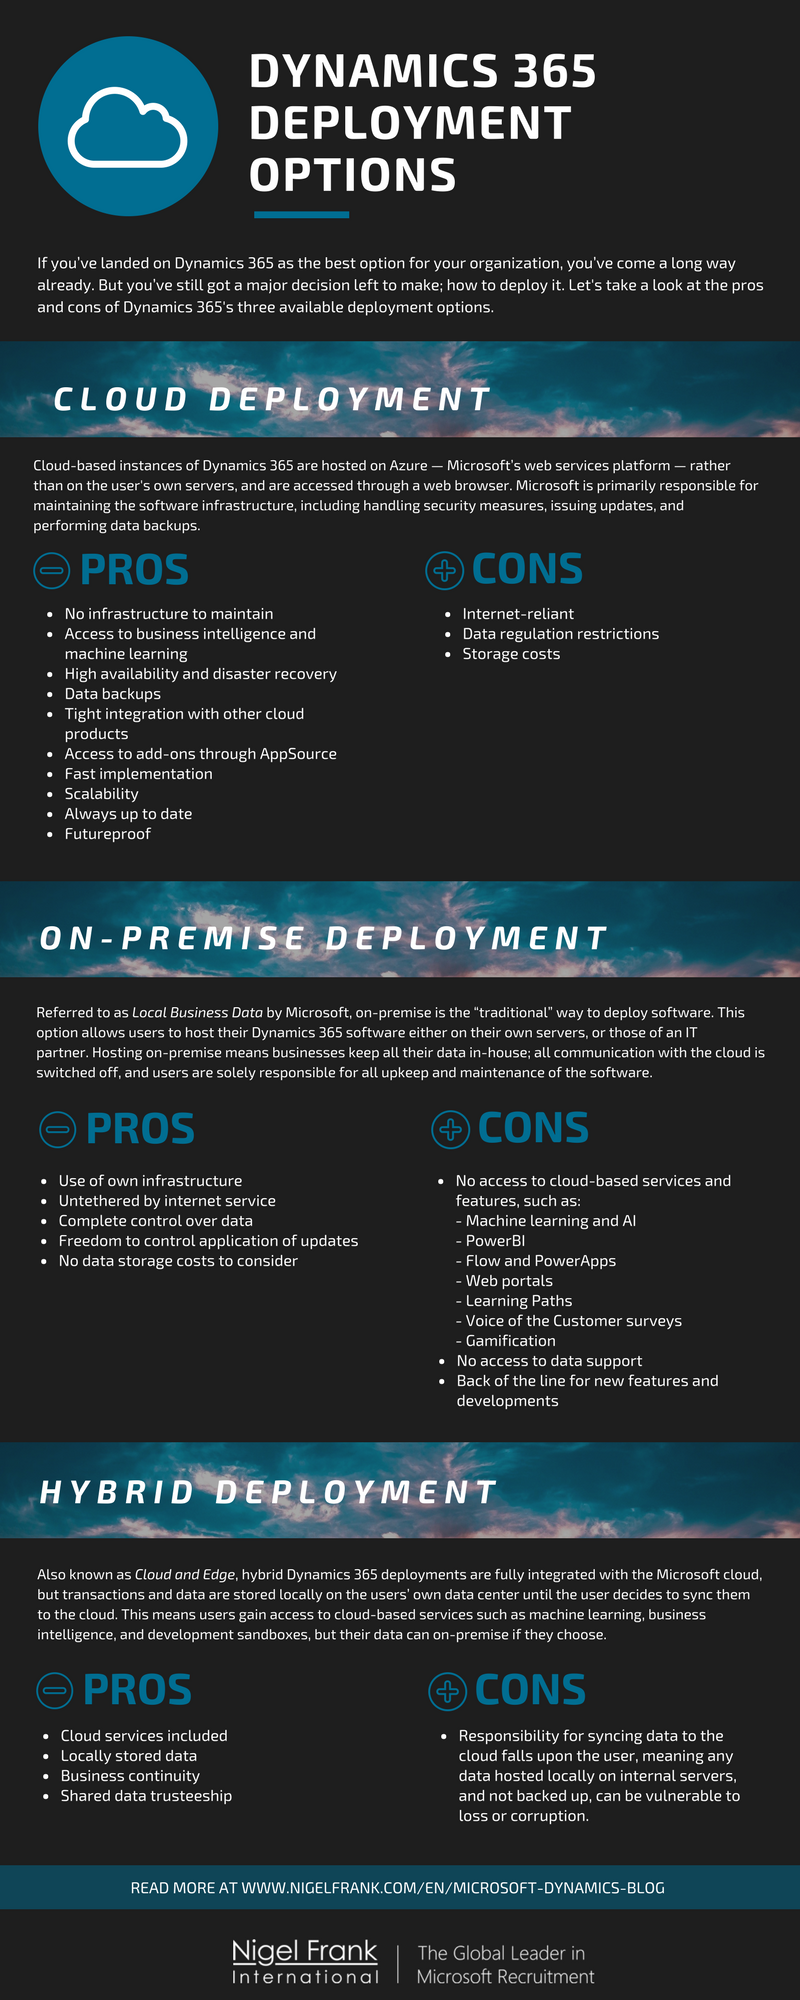 Infographic showing pros and cons of Dynamics 365 deployment options